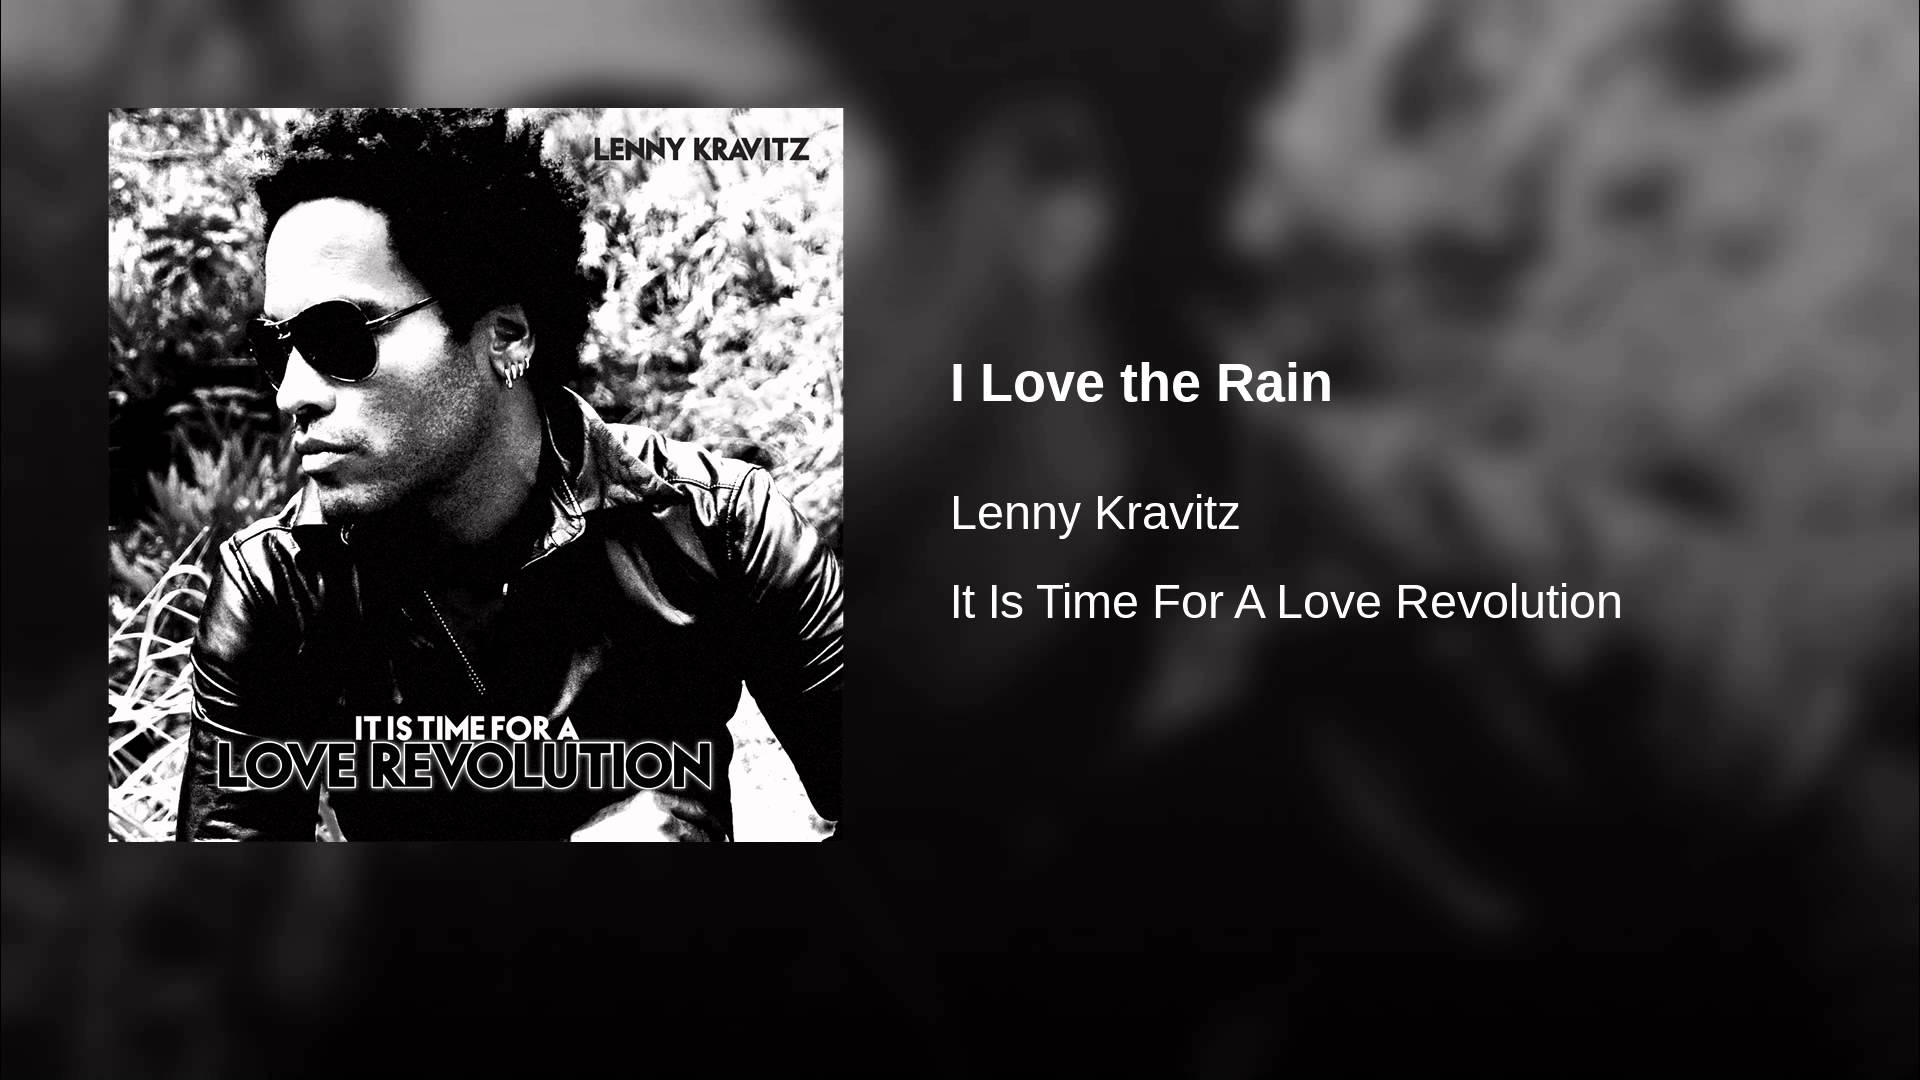 Life is revolution. Lenny Kravitz 2008 it is time for a Love Revolution. Lenny Kravitz Baptism 2004. Lenny Kravitz albums. Lenny Kravitz автограф.